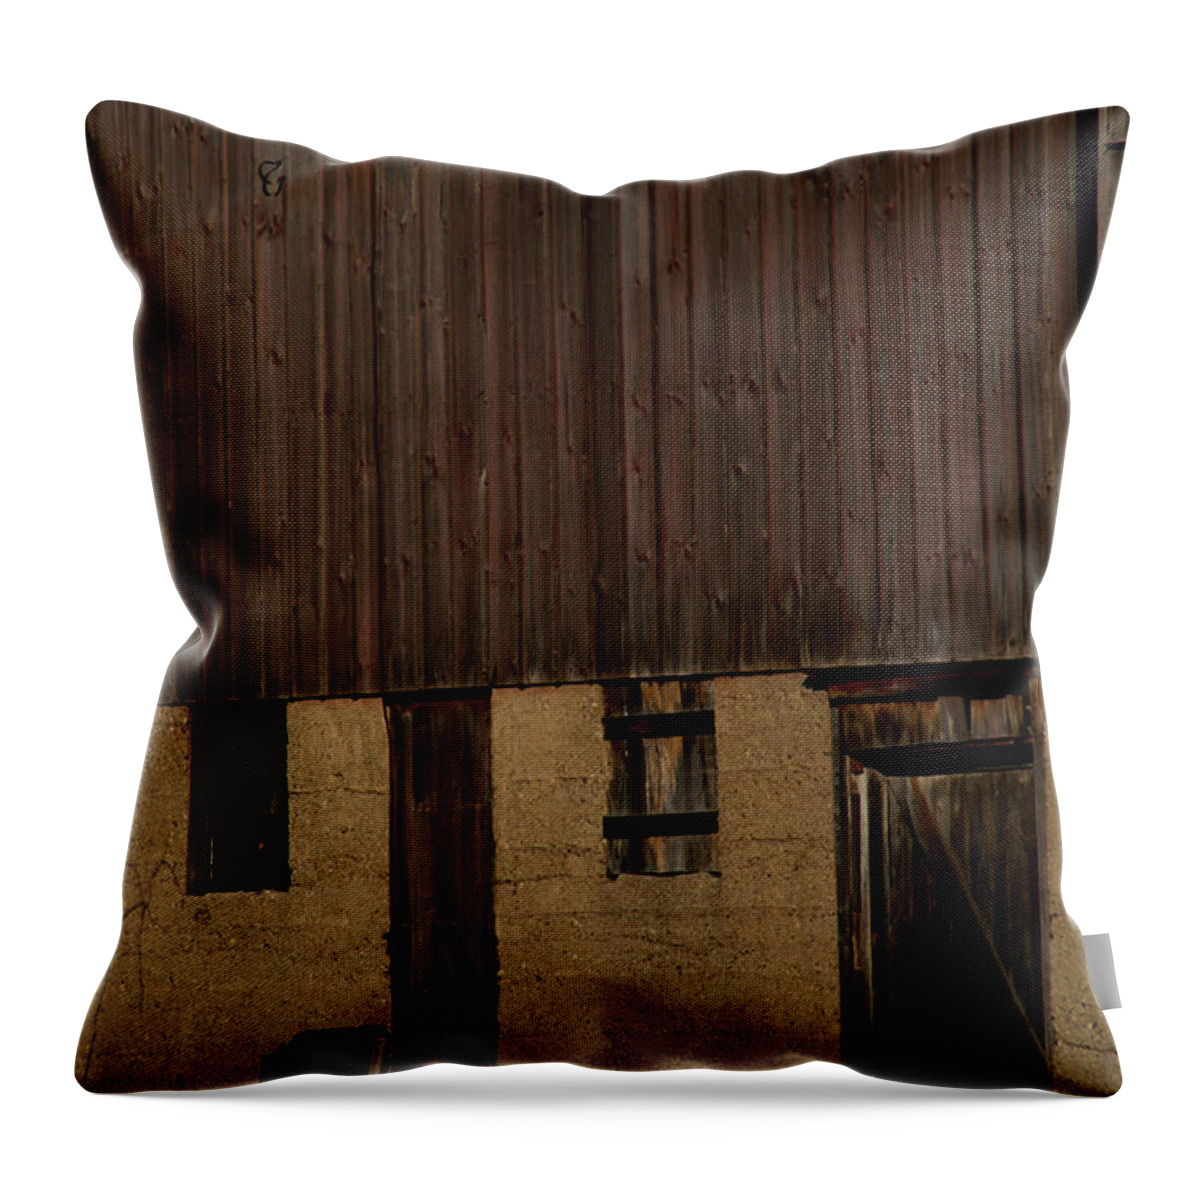 Barn Throw Pillow featuring the photograph Lost Behind These Walls by Linda Shafer